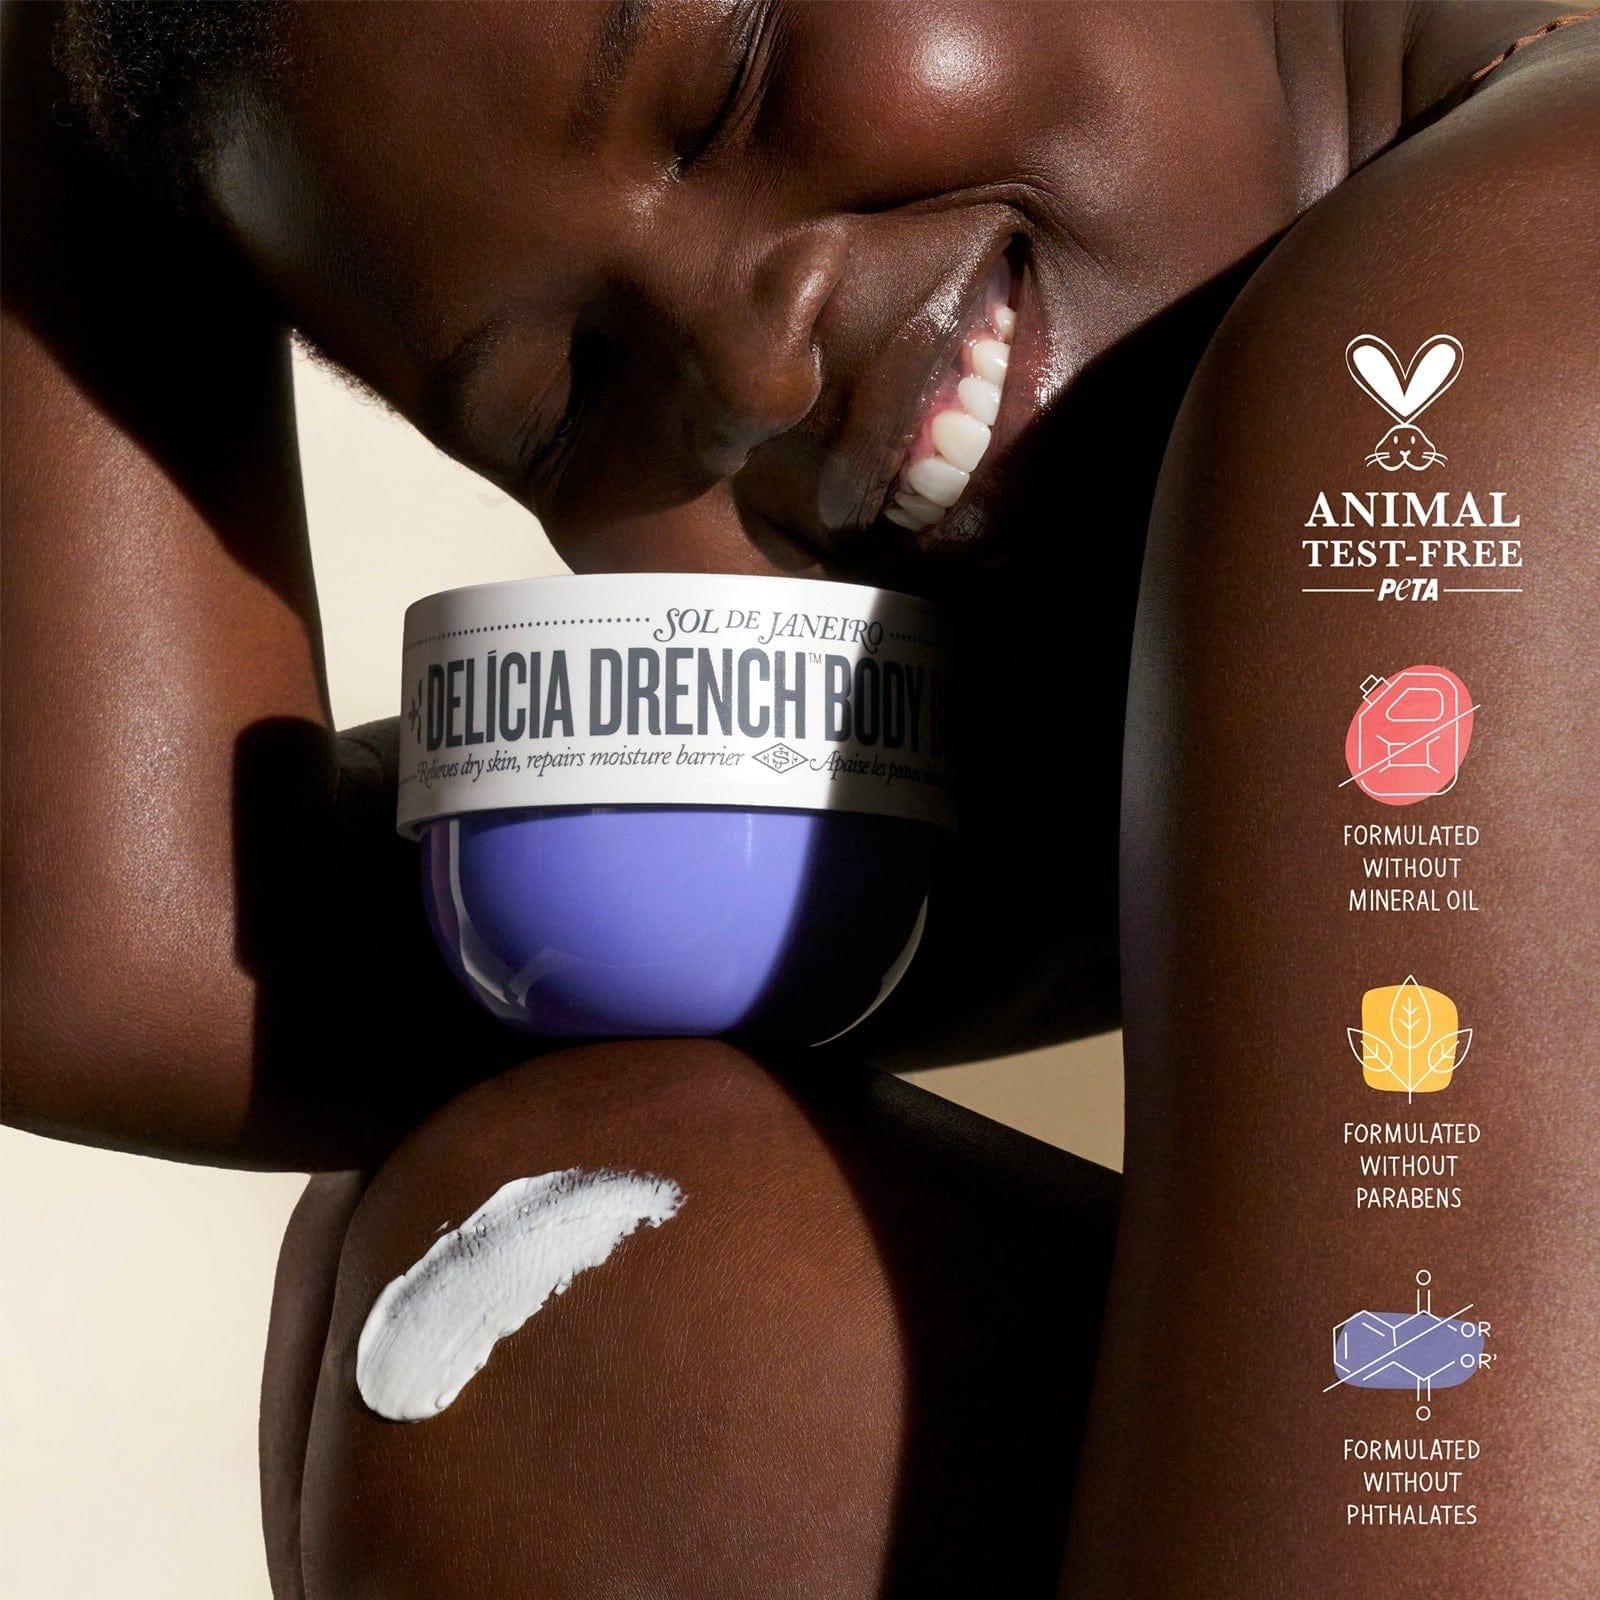 Animal test-free PETA. formulated without minerals oil, parabens, phthalates